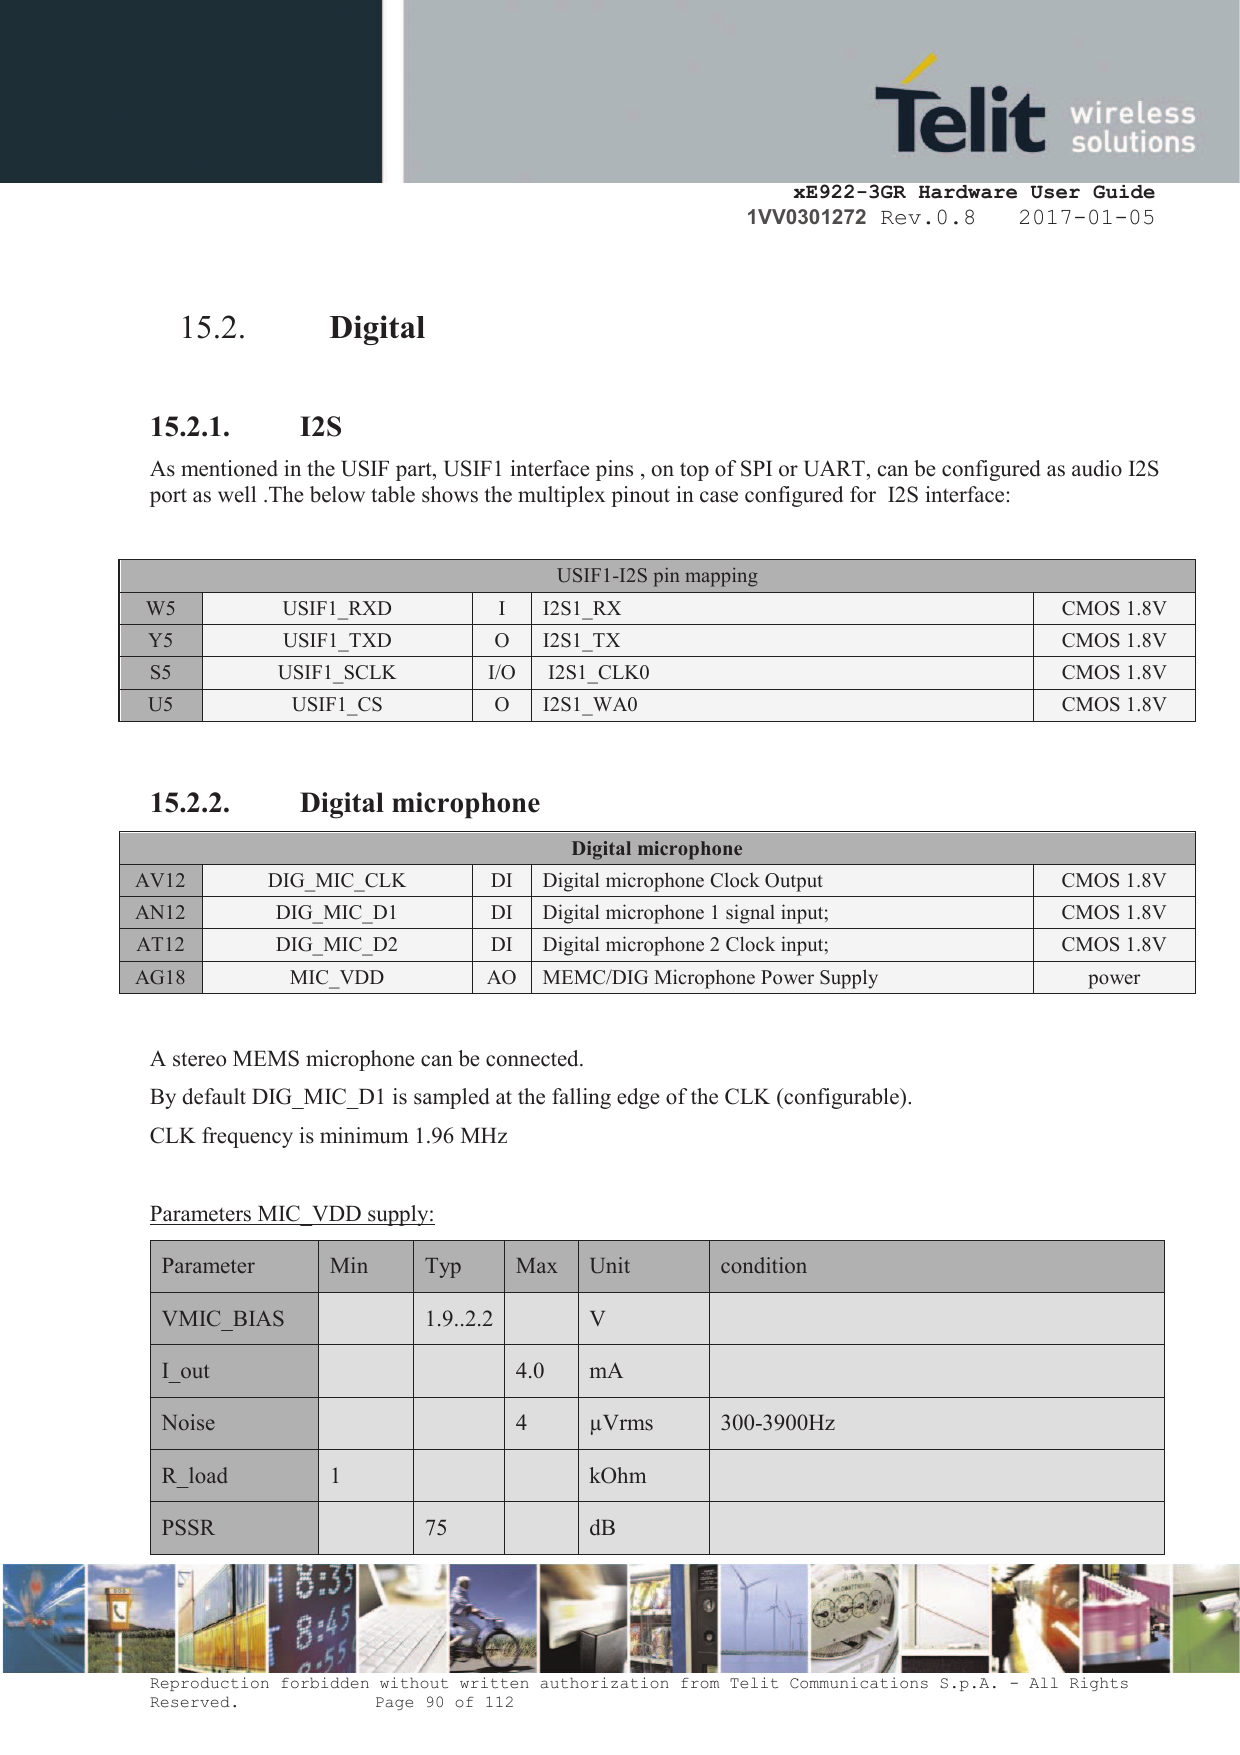     xE922-3GR Hardware User Guide 1VV0301272 Rev.0.8   2017-01-05 Reproduction forbidden without written authorization from Telit Communications S.p.A. - All Rights Reserved.    Page 90 of 112   15.2. Digital  15.2.1. I2S As mentioned in the USIF part, USIF1 interface pins , on top of SPI or UART, can be configured as audio I2S port as well .The below table shows the multiplex pinout in case configured for  I2S interface:  USIF1-I2S pin mapping W5 USIF1_RXD I I2S1_RX CMOS 1.8V Y5 USIF1_TXD O I2S1_TX CMOS 1.8V S5 USIF1_SCLK I/O  I2S1_CLK0 CMOS 1.8V U5 USIF1_CS O I2S1_WA0 CMOS 1.8V  15.2.2. Digital microphone Digital microphone AV12 DIG_MIC_CLK DI Digital microphone Clock Output CMOS 1.8V AN12 DIG_MIC_D1 DI Digital microphone 1 signal input; CMOS 1.8V AT12 DIG_MIC_D2 DI Digital microphone 2 Clock input; CMOS 1.8V AG18 MIC_VDD AO MEMC/DIG Microphone Power Supply power  A stereo MEMS microphone can be connected.  By default DIG_MIC_D1 is sampled at the falling edge of the CLK (configurable). CLK frequency is minimum 1.96 MHz  Parameters MIC_VDD supply: Parameter  Min Typ Max Unit condition VMIC_BIAS  1.9..2.2  V  I_out   4.0 mA  Noise   4 µVrms 300-3900Hz R_load 1   kOhm  PSSR  75  dB  